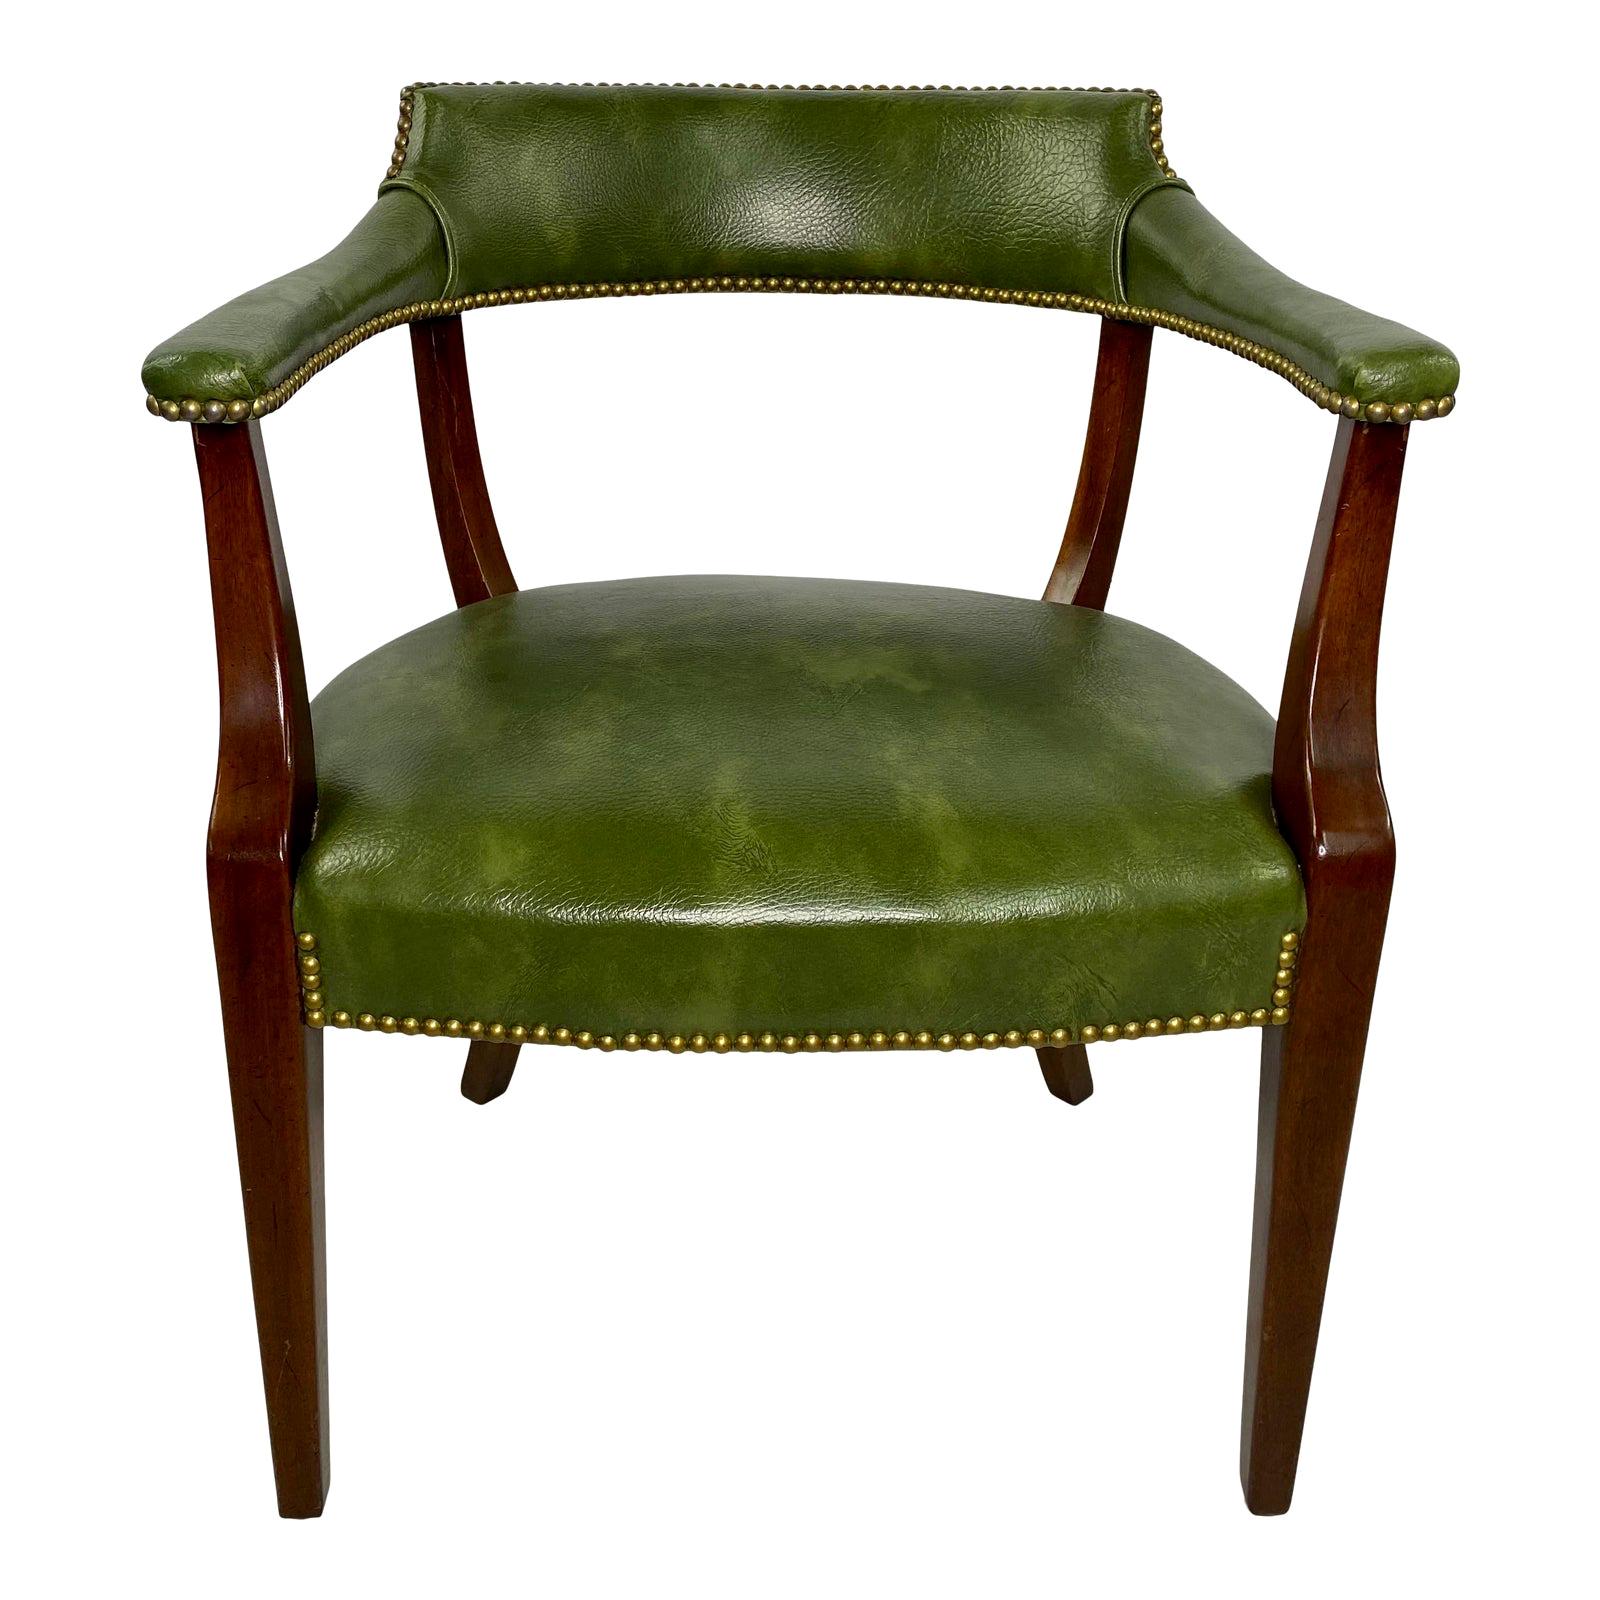 Vintage Green Leather Chair Made by Hickory Chair Company